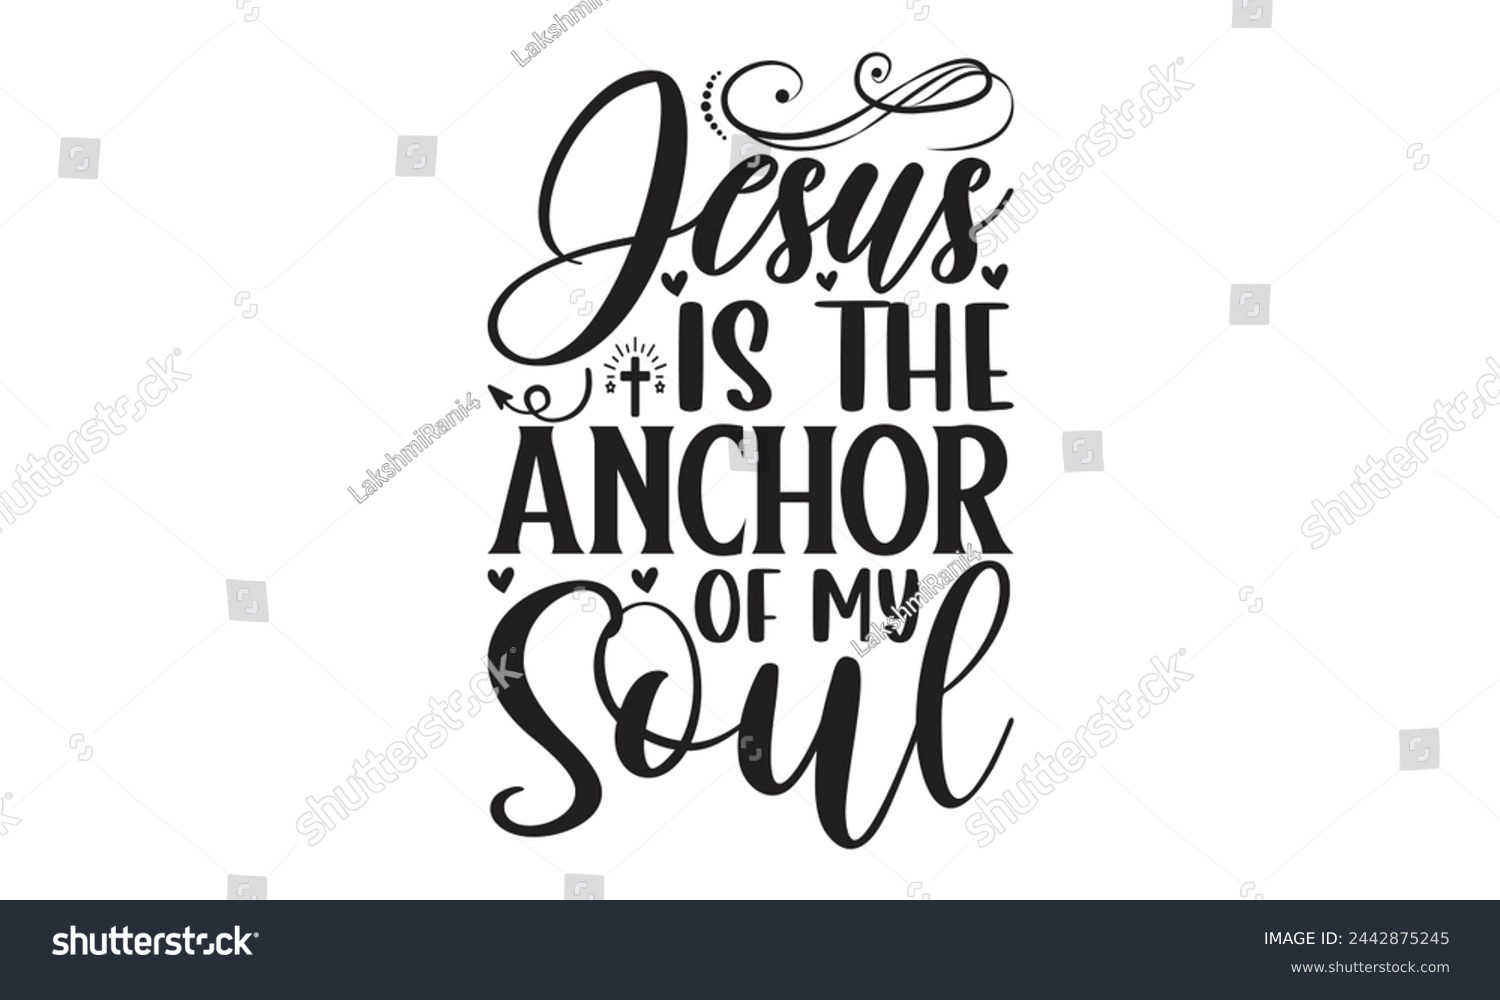 SVG of Jesus is the anchor of my soul - Lettering design for greeting banners, Mouse Pads, Prints, Cards and Posters, Mugs, Notebooks, Floor Pillows and T-shirt prints design. svg